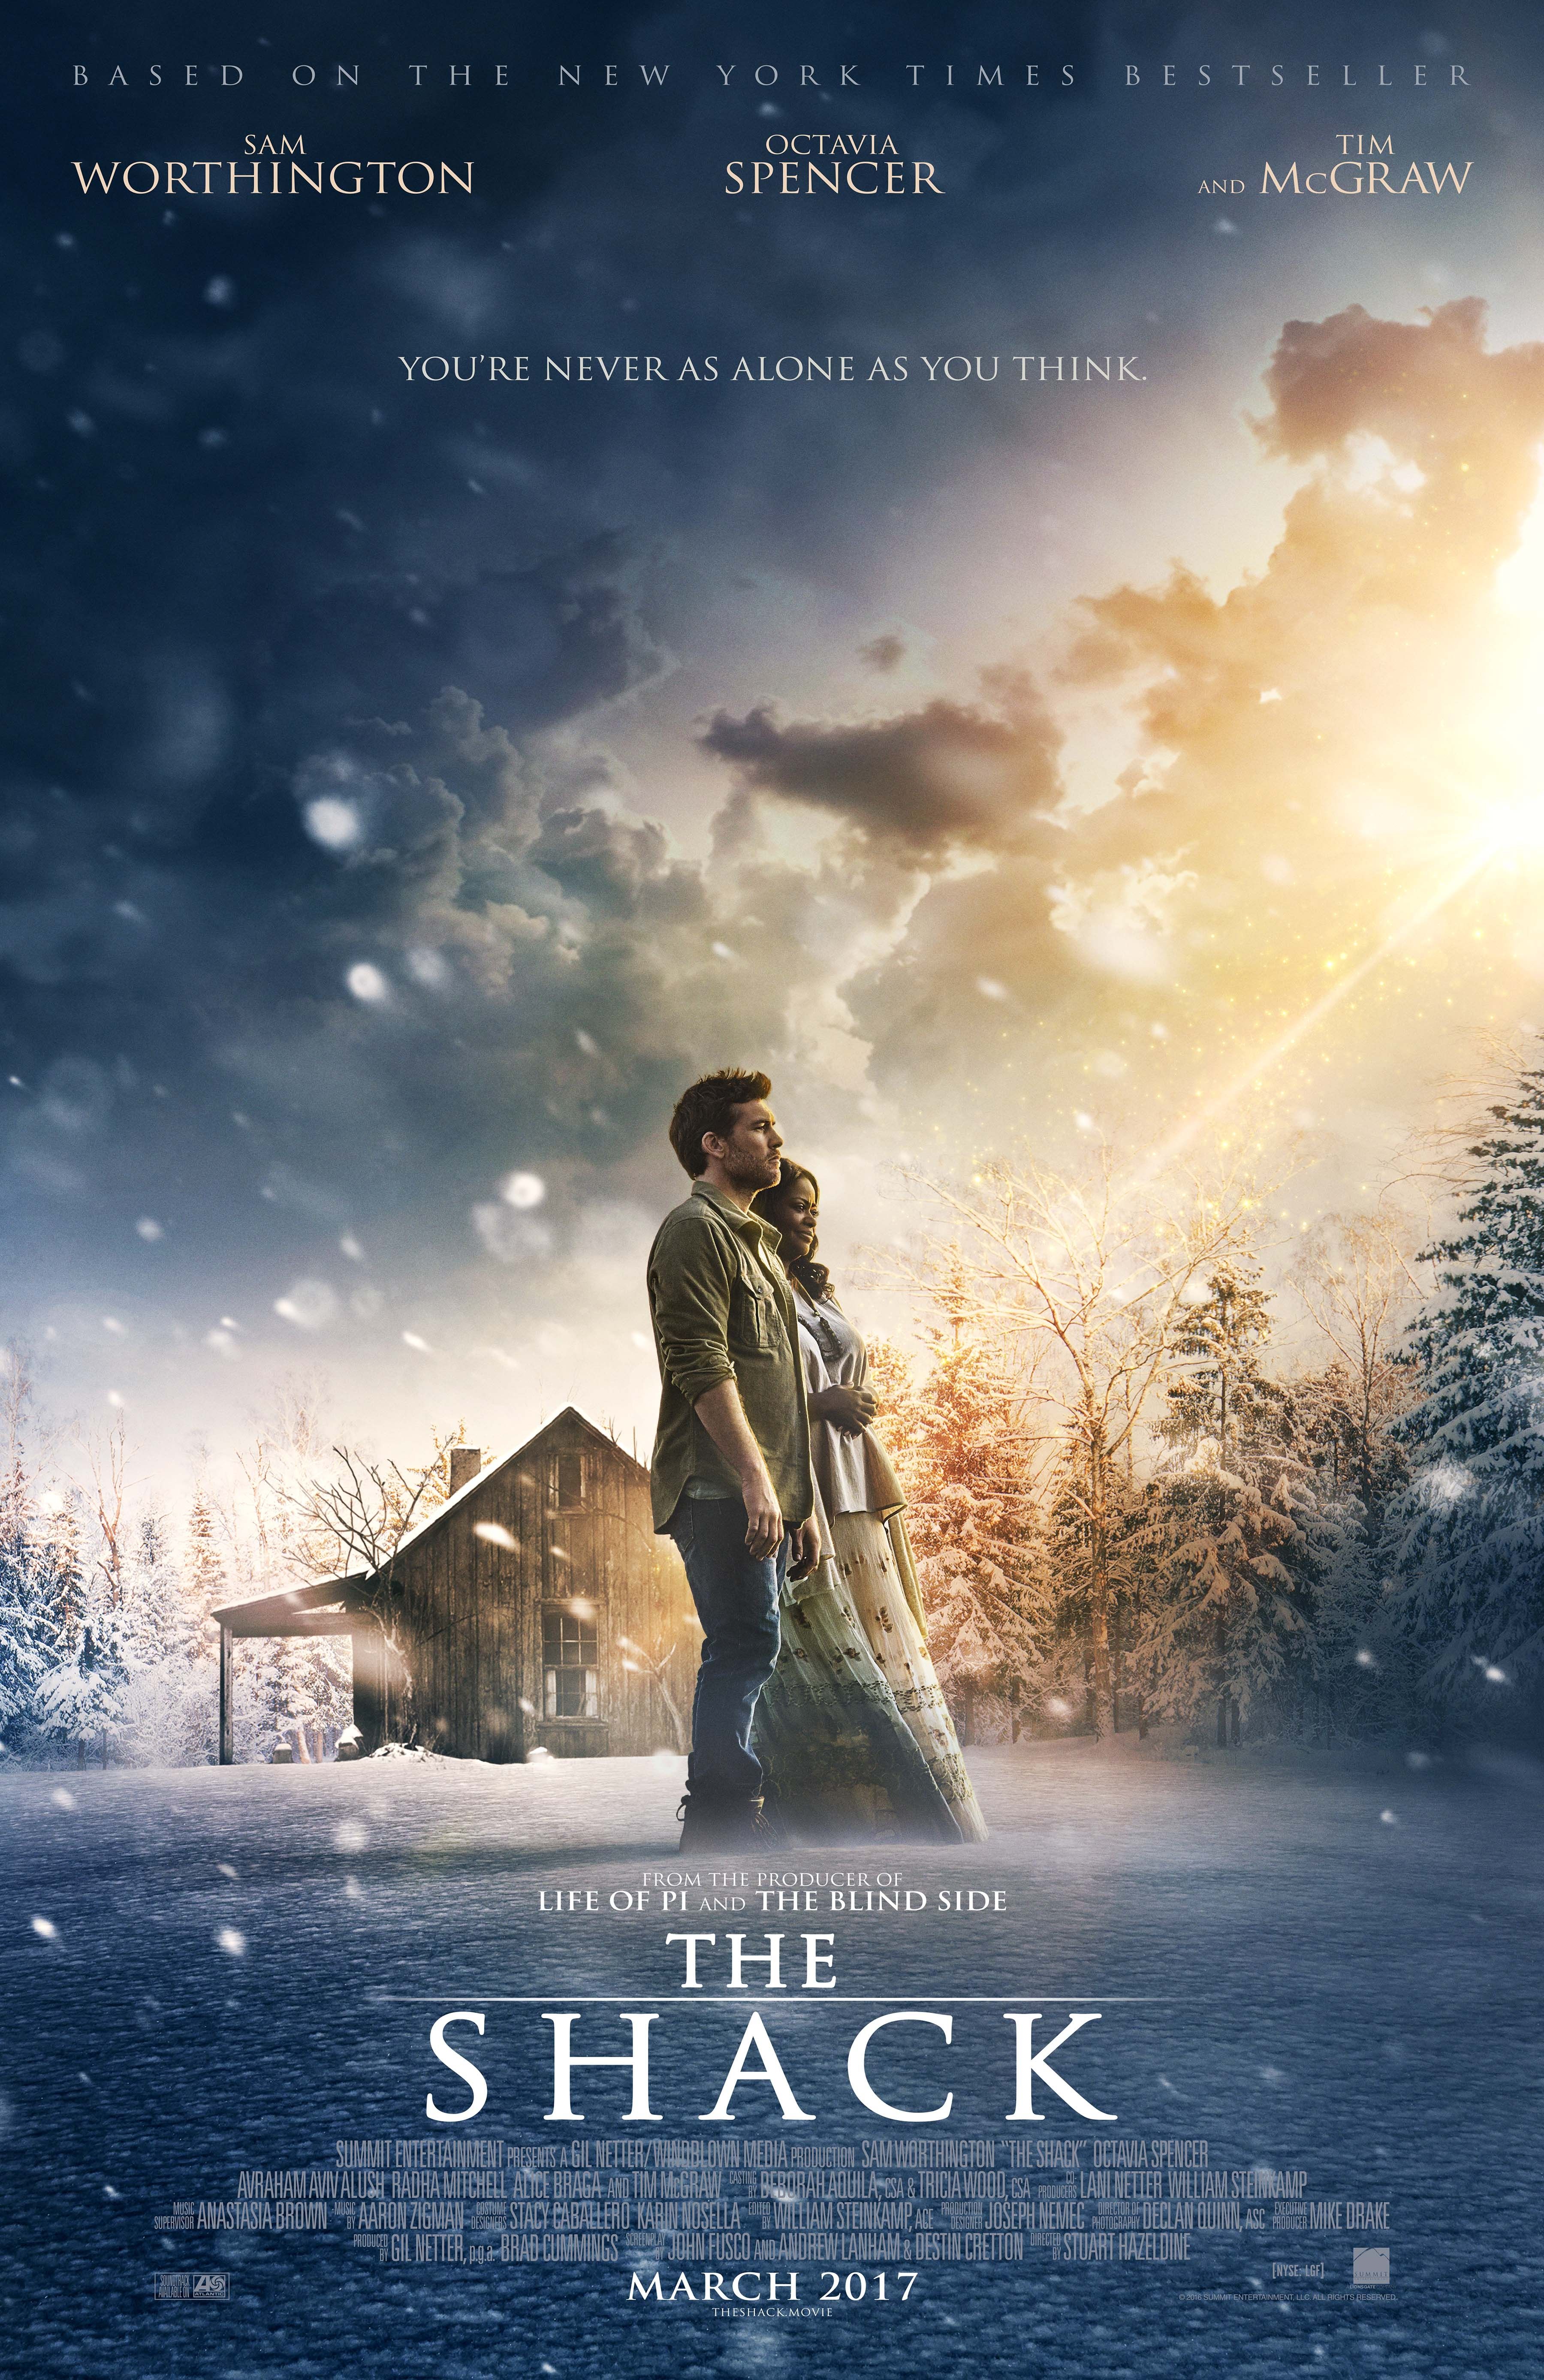 Watch The Shack Official Trailer Online 2017